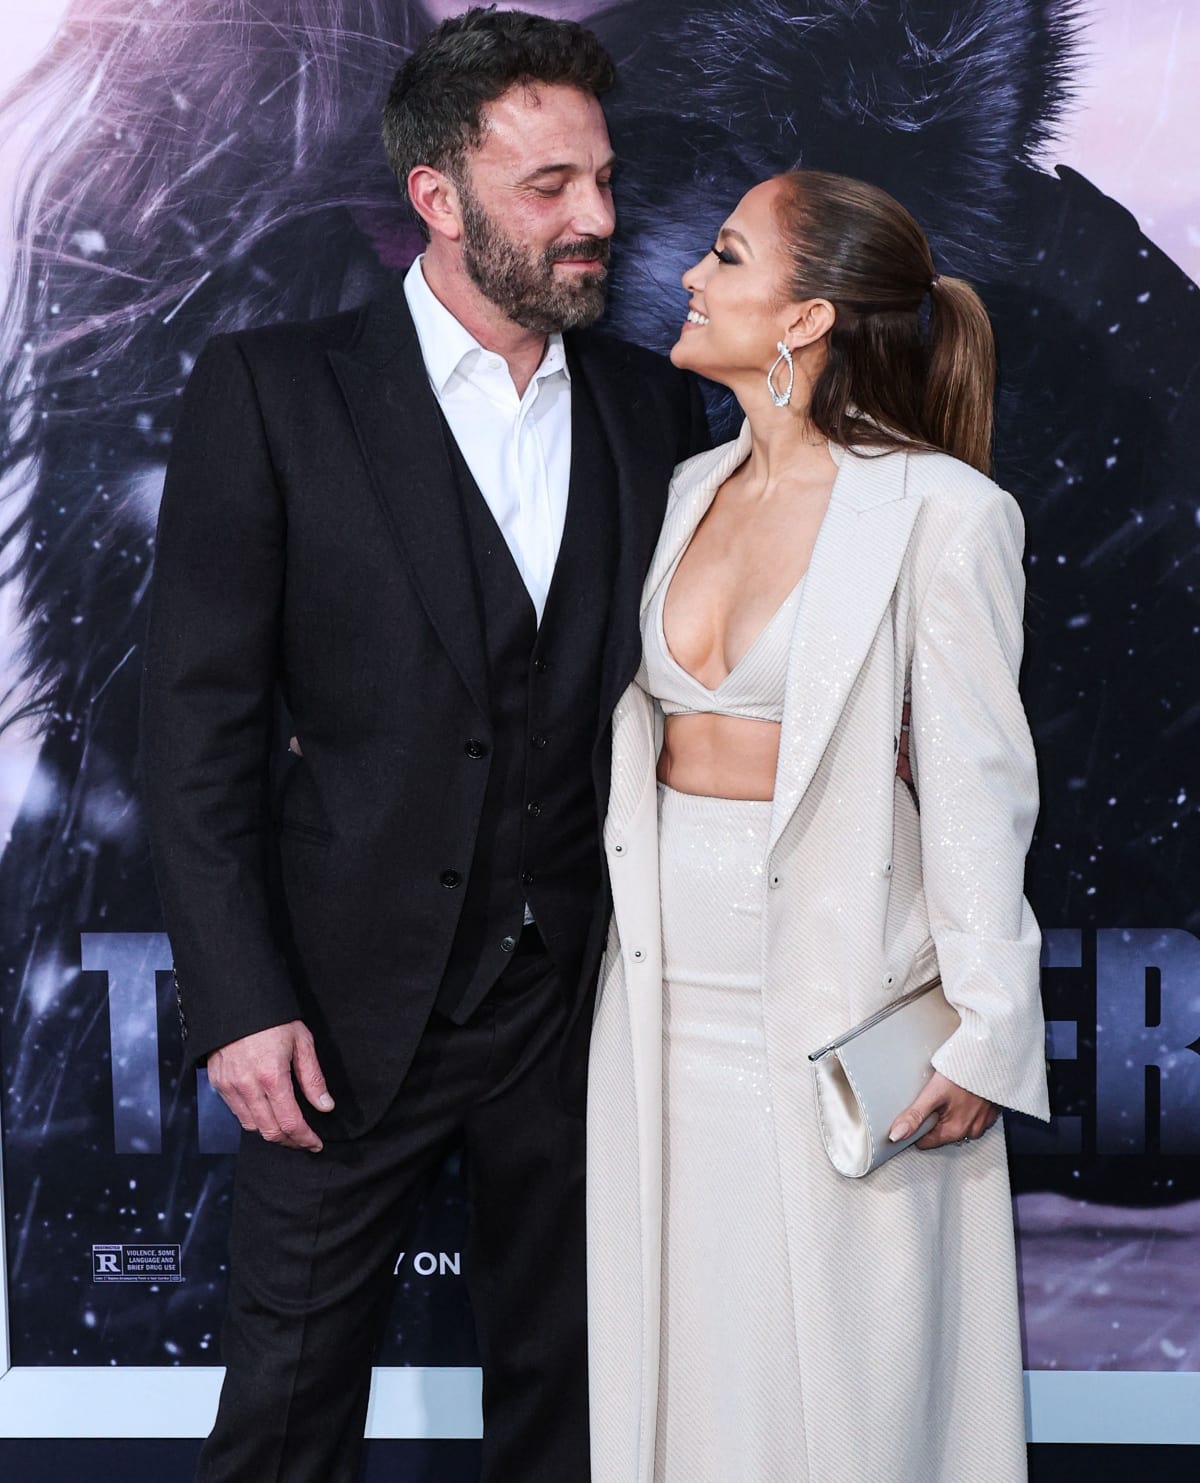 Ben Affleck and Jennifer Lopez cozied up to each other on the black carpet